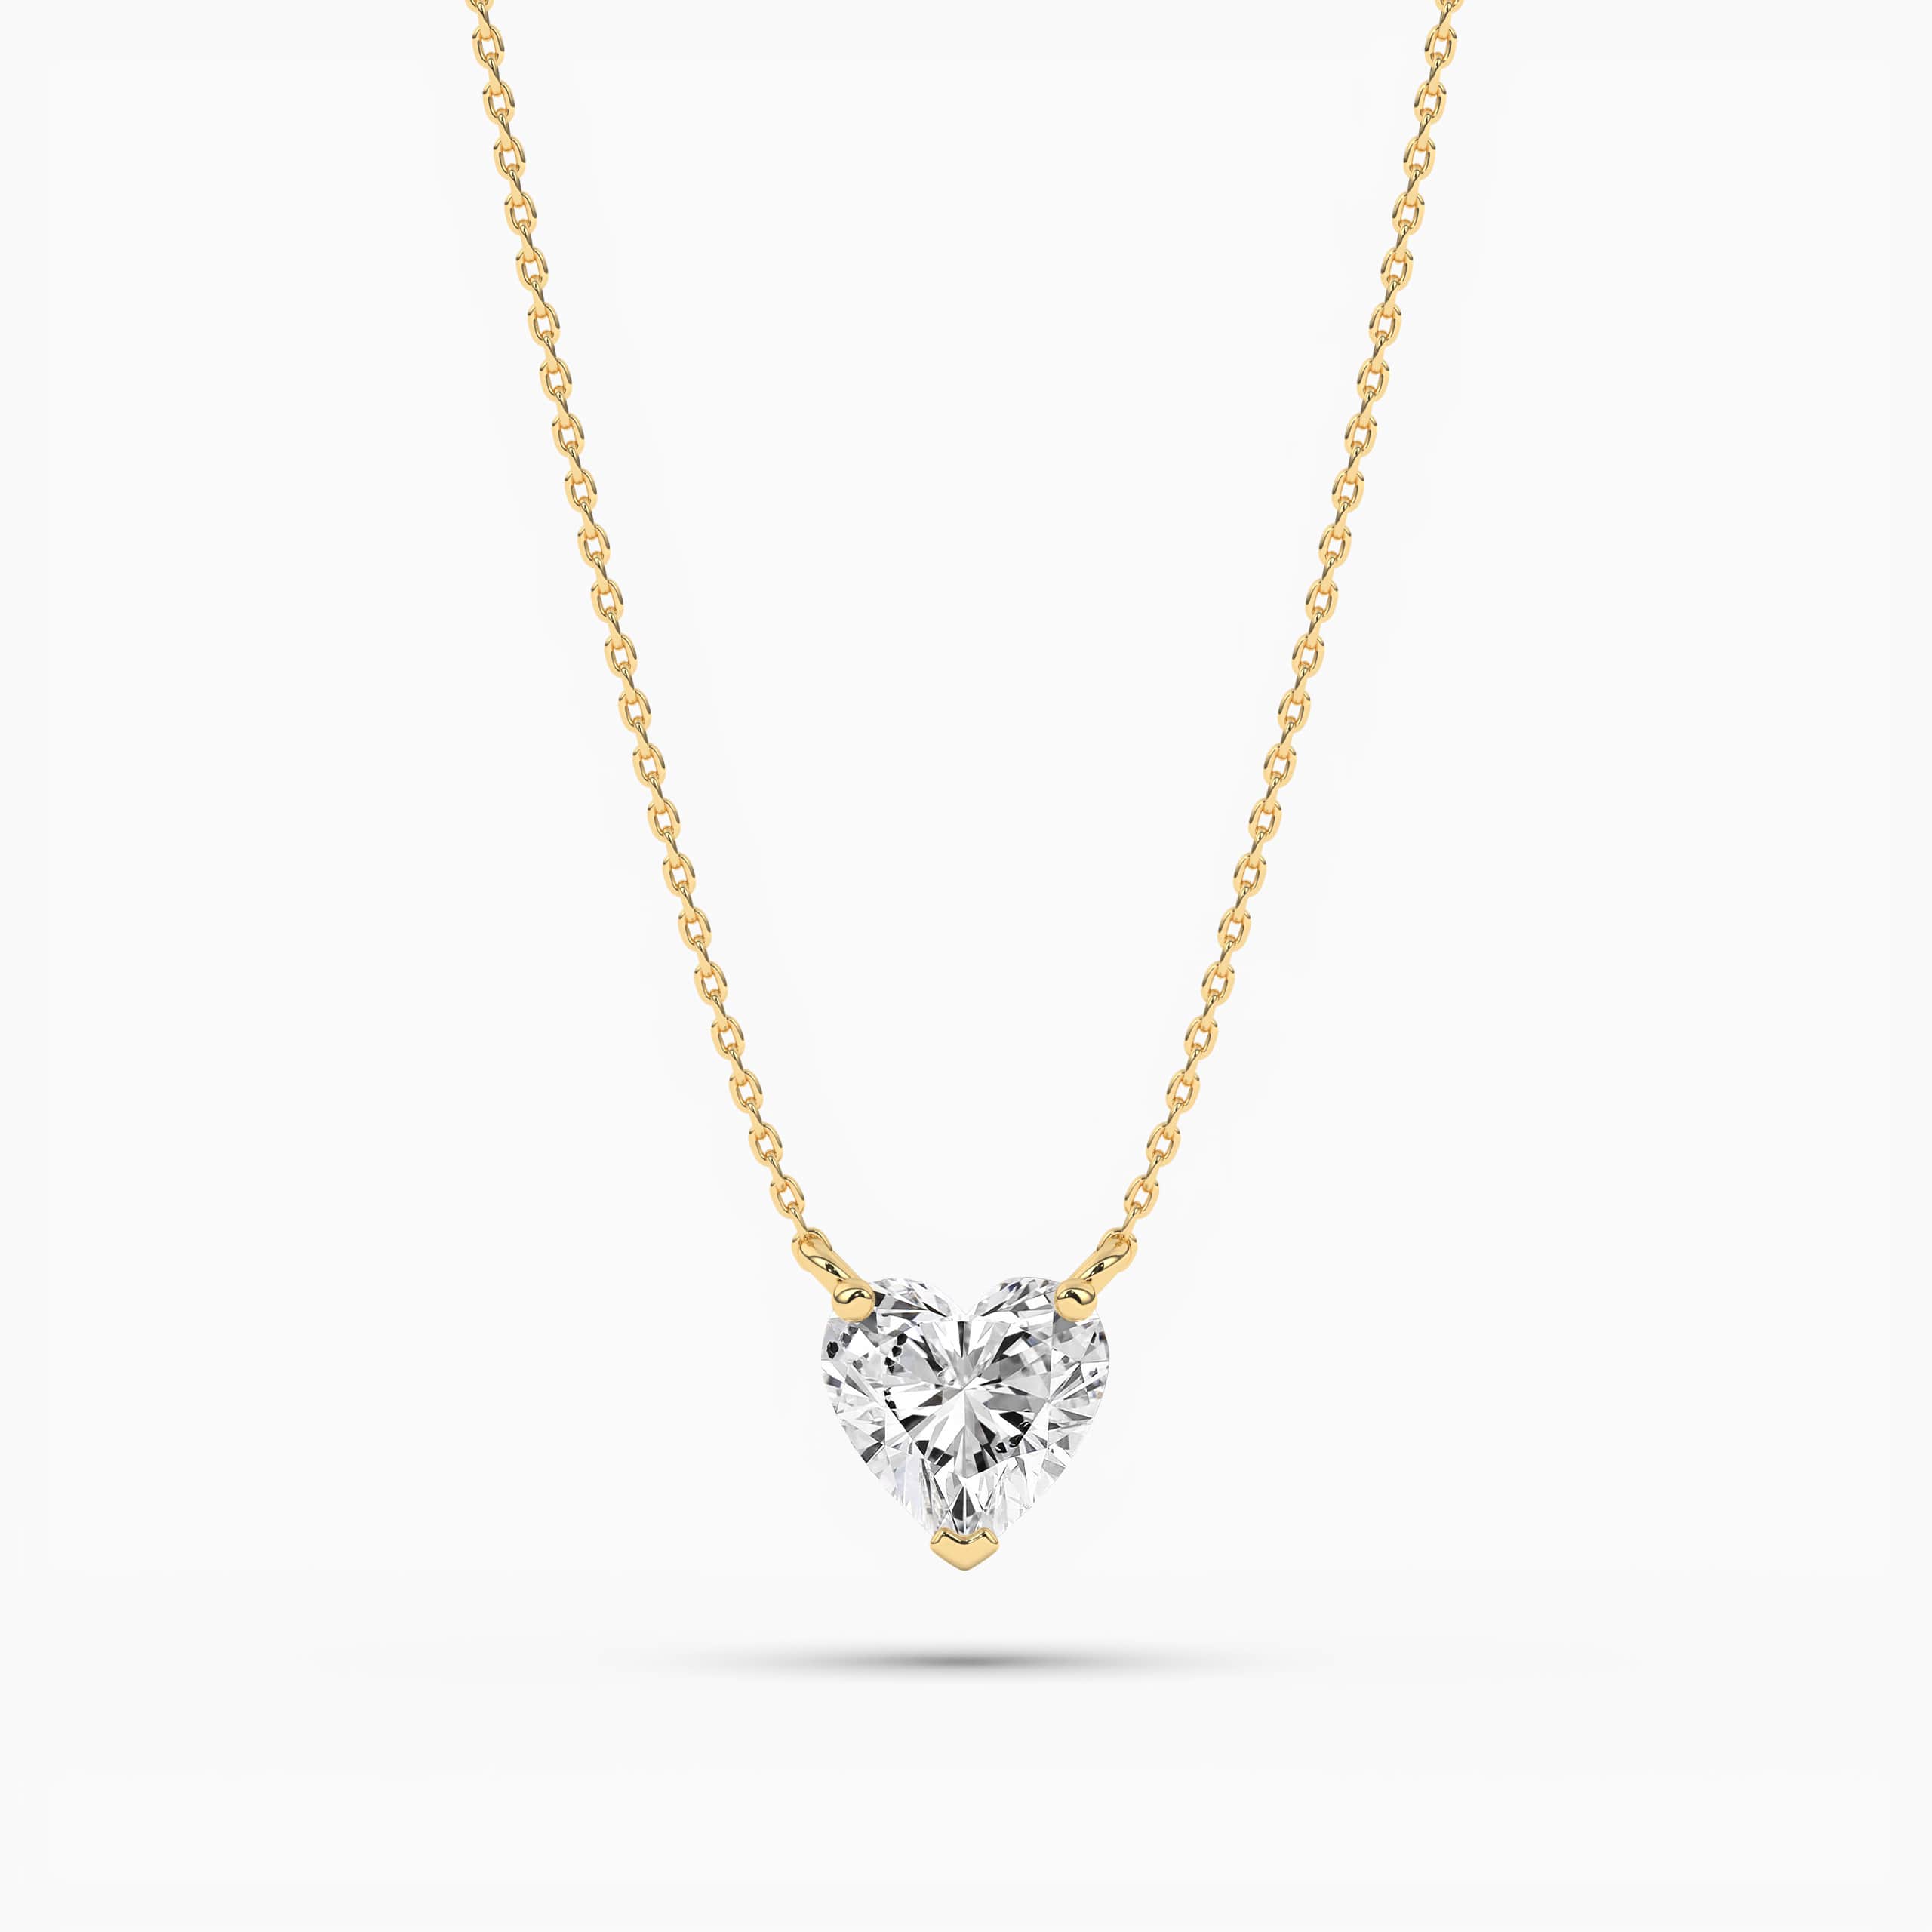 DIAMOND HEART SOLITAIRE NECKLACE IN YELLOW GOLD